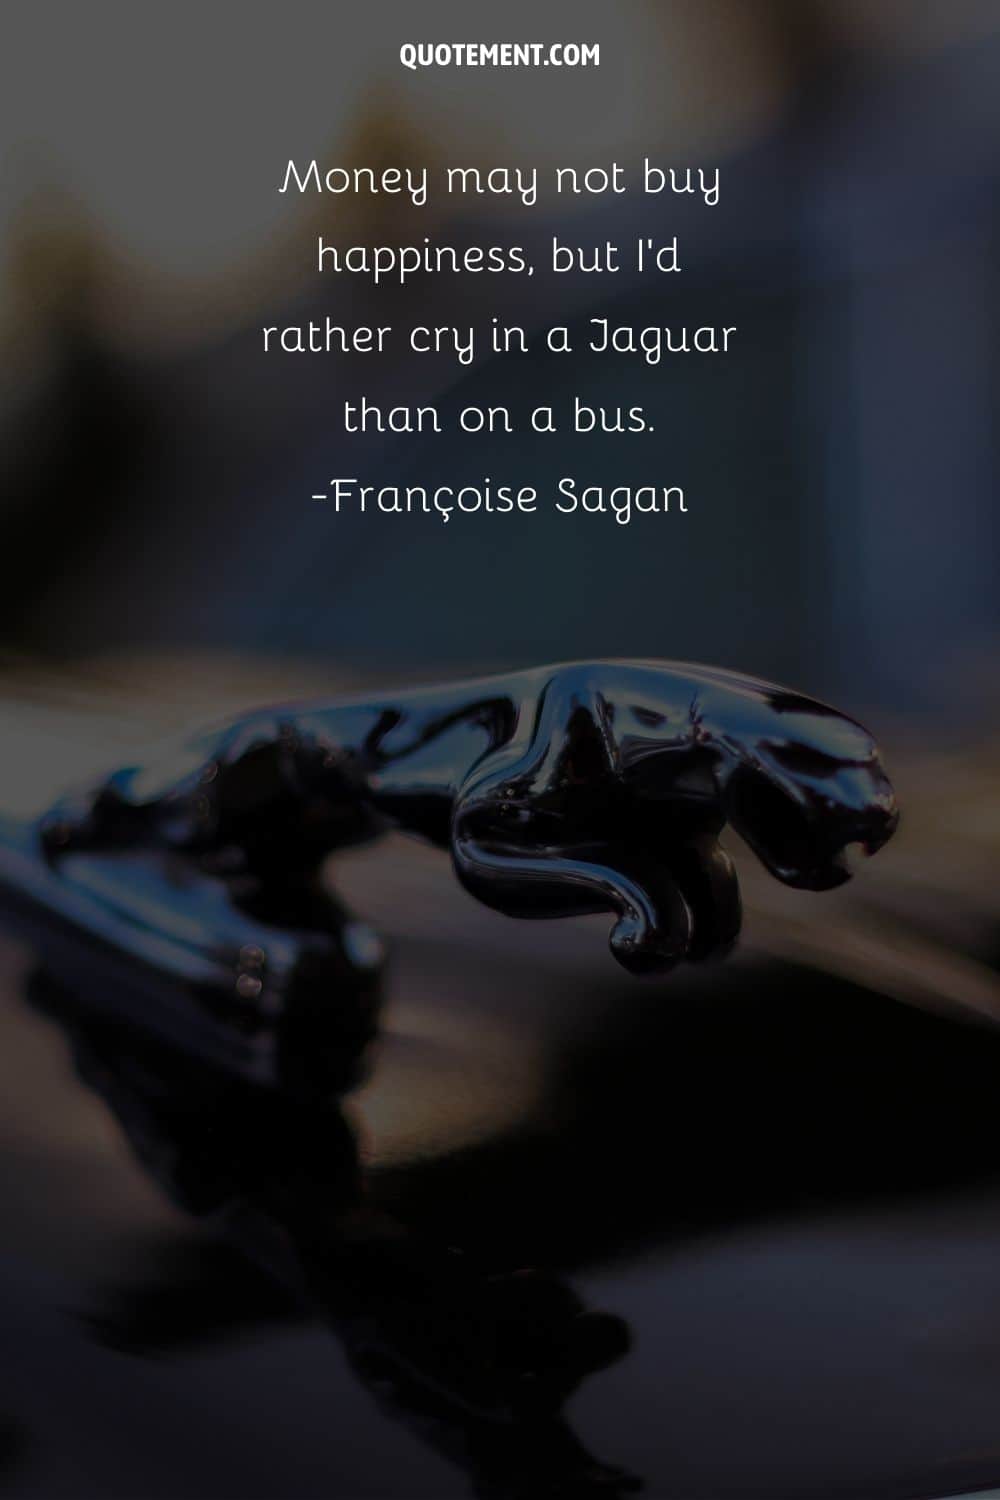 “Money may not buy happiness, but I'd rather cry in a Jaguar than on a bus.”― Françoise Sagan